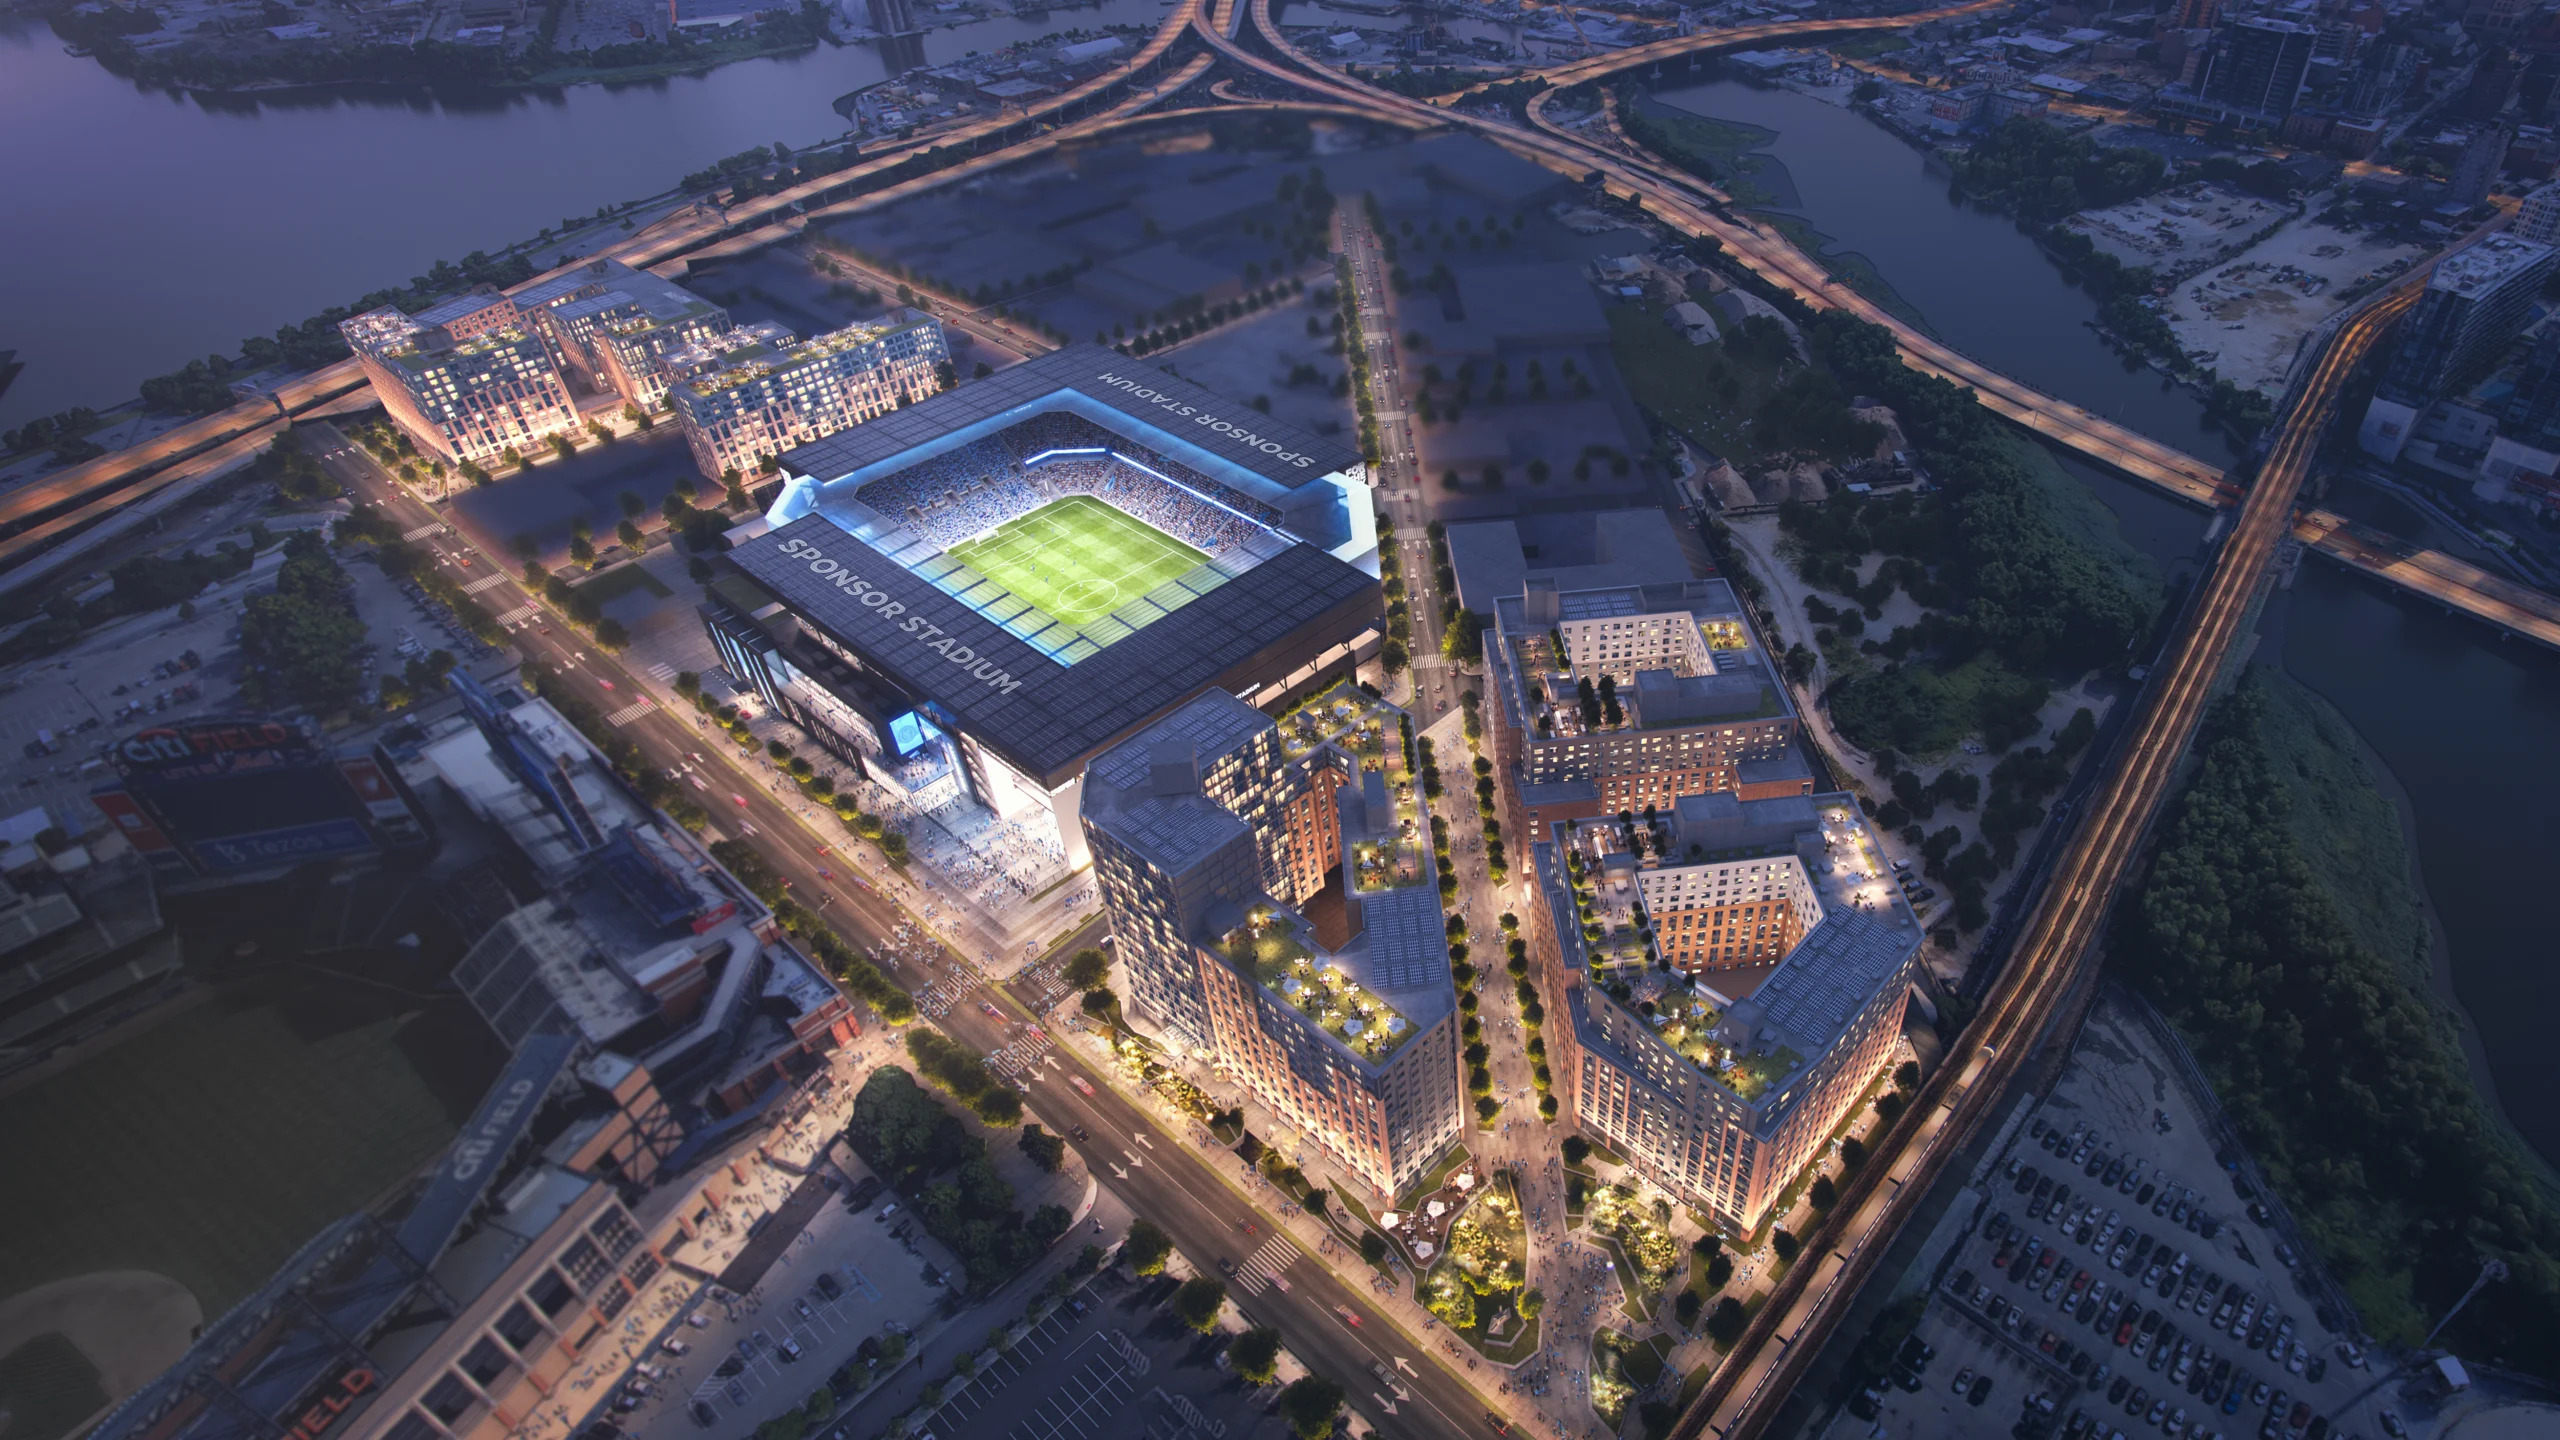 NYC is getting its first-ever soccer stadium